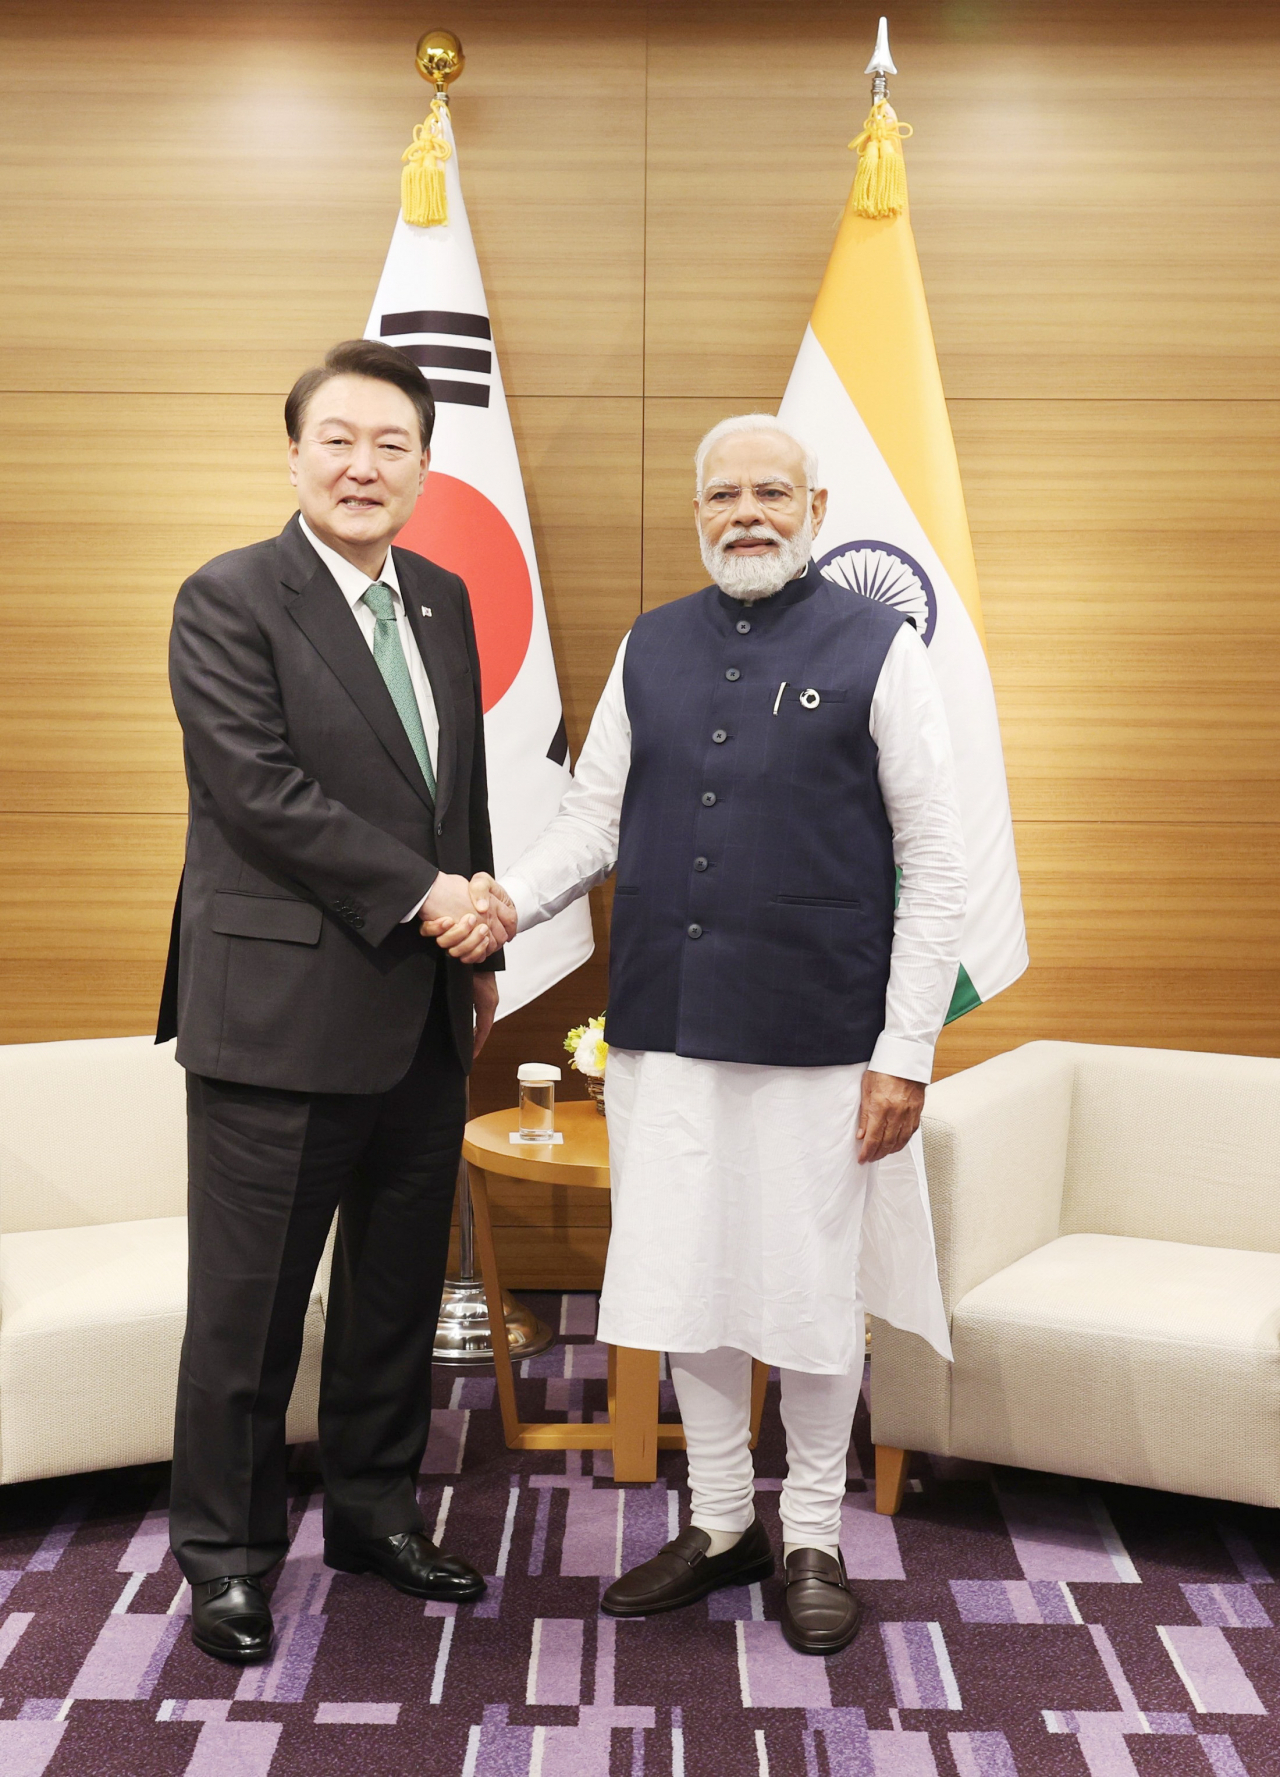 Indian Prime Minister Narendra Modi meets President Yoon Suk Yeol in Hiroshima on the sidelines of G-7 Summit on 20 May 2023. (Prime Minister's Office, Government of India)